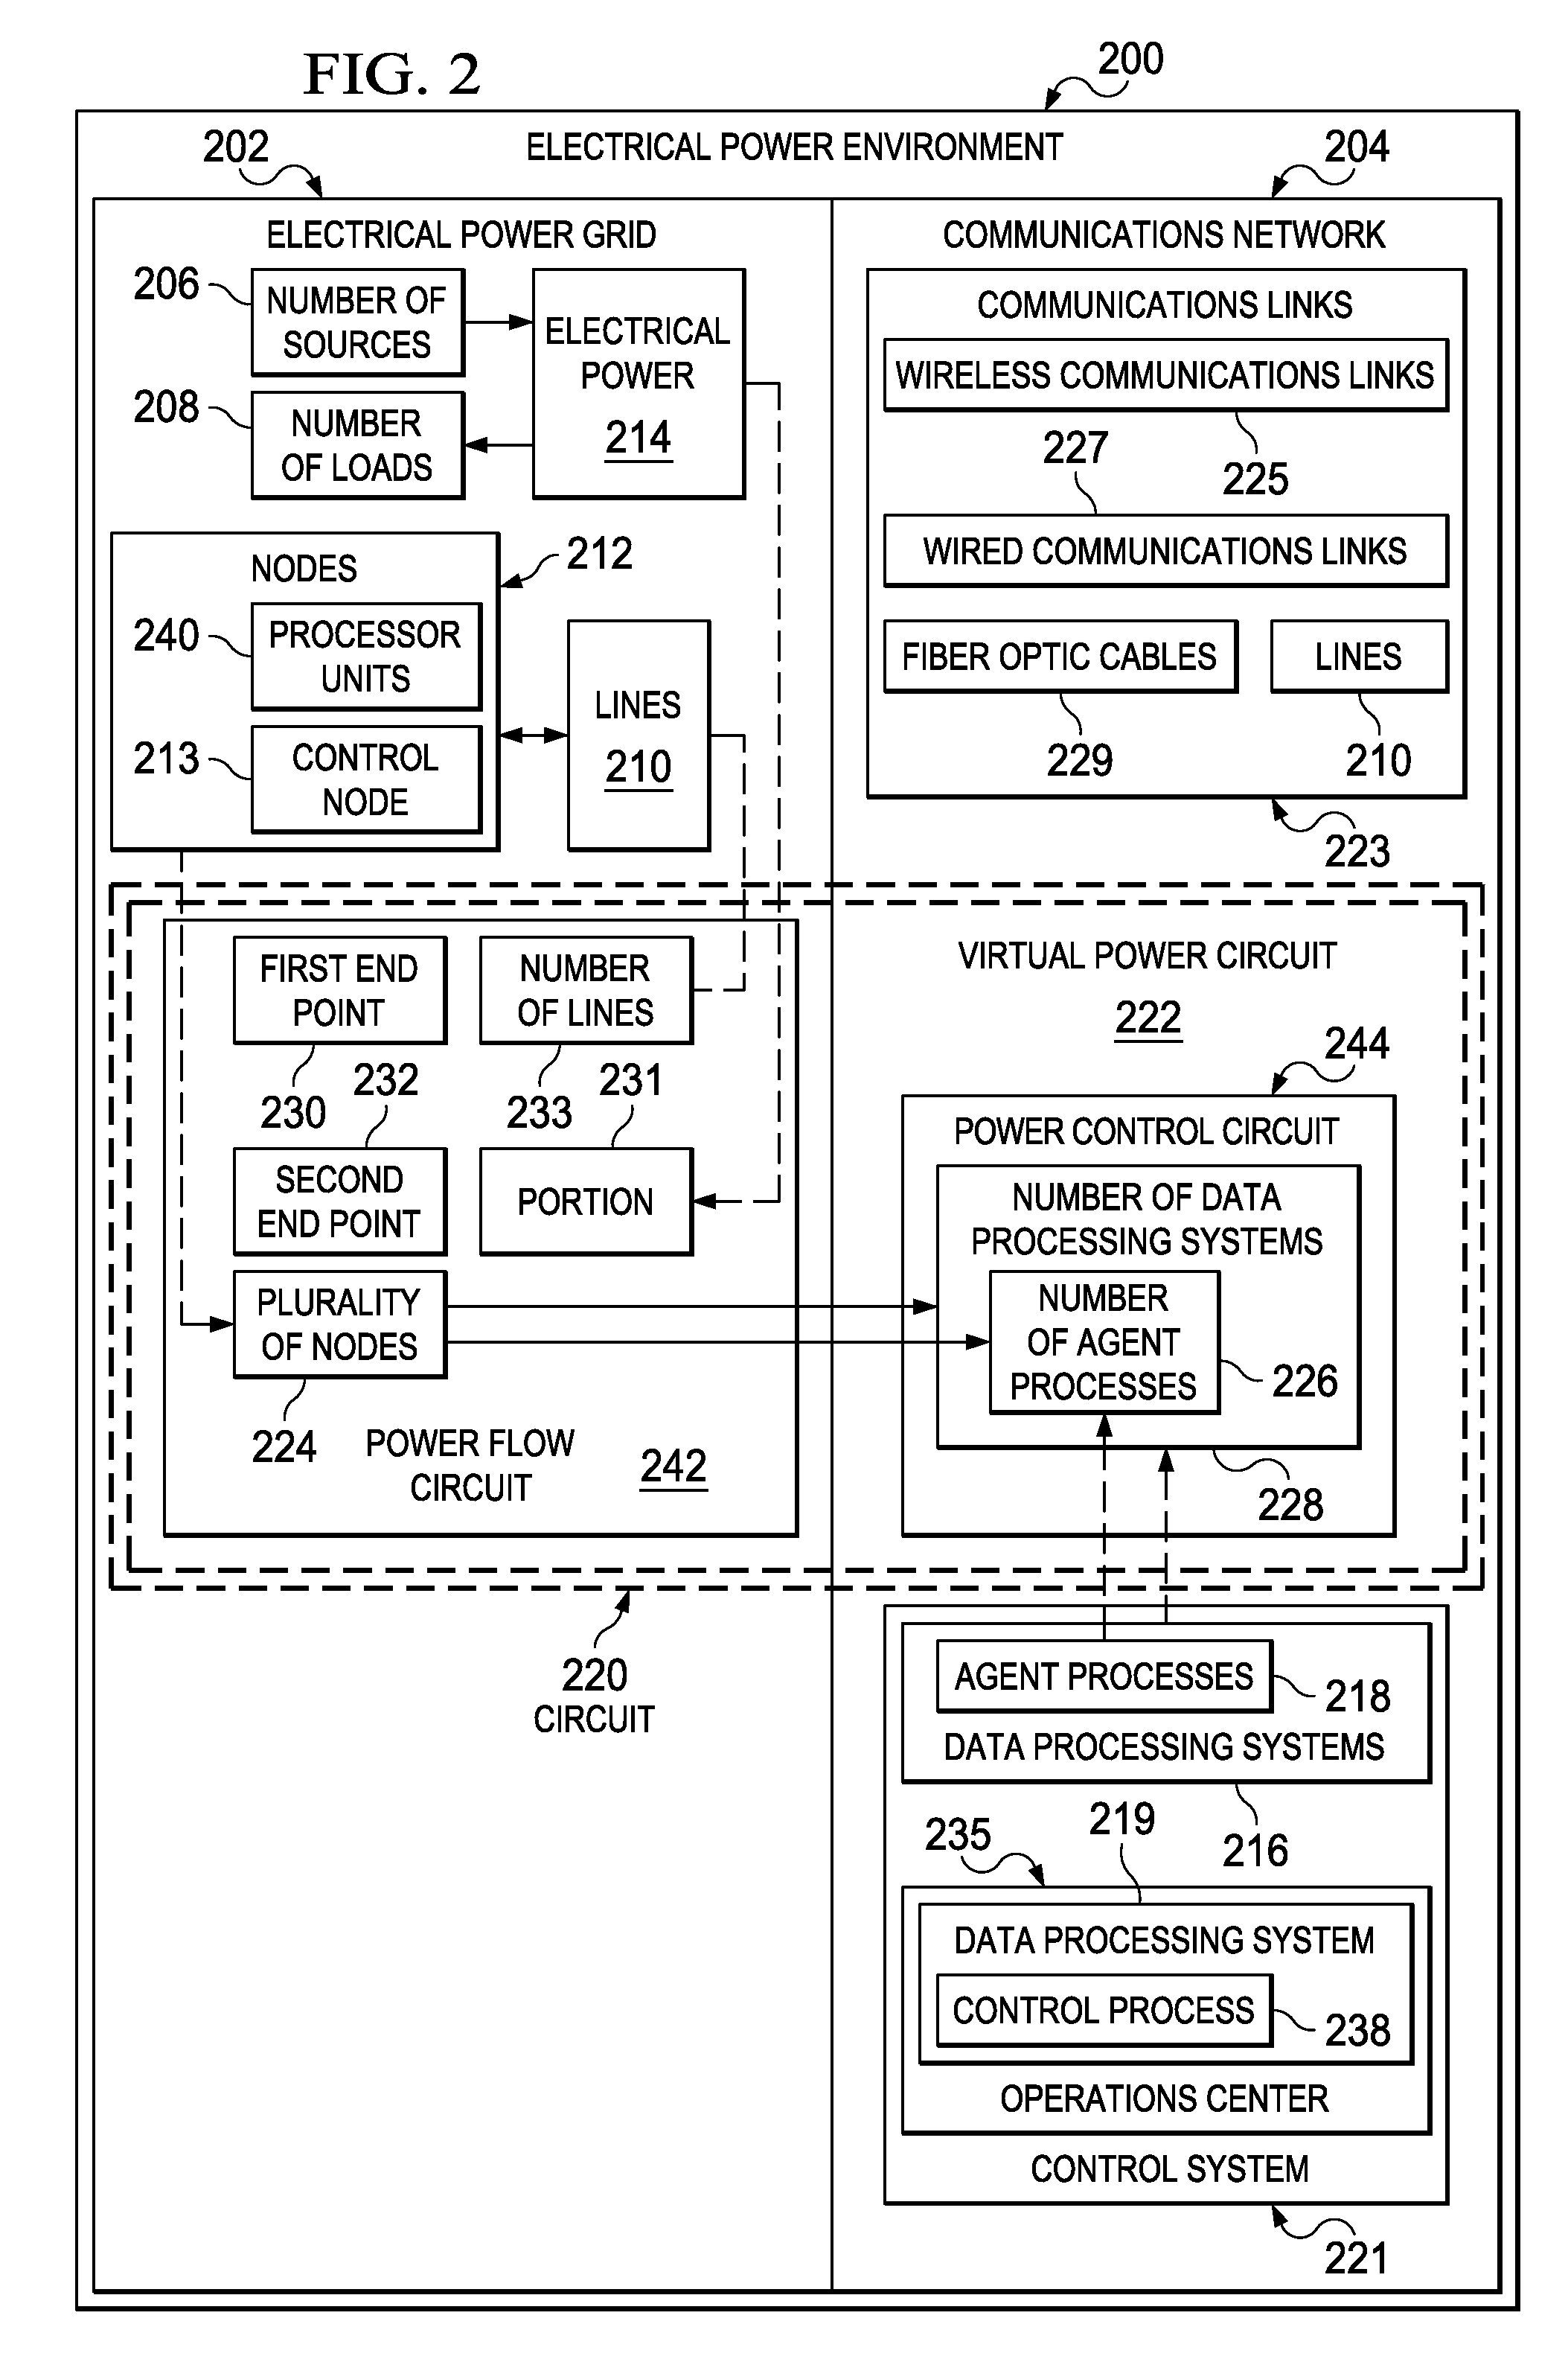 Network centric power flow control